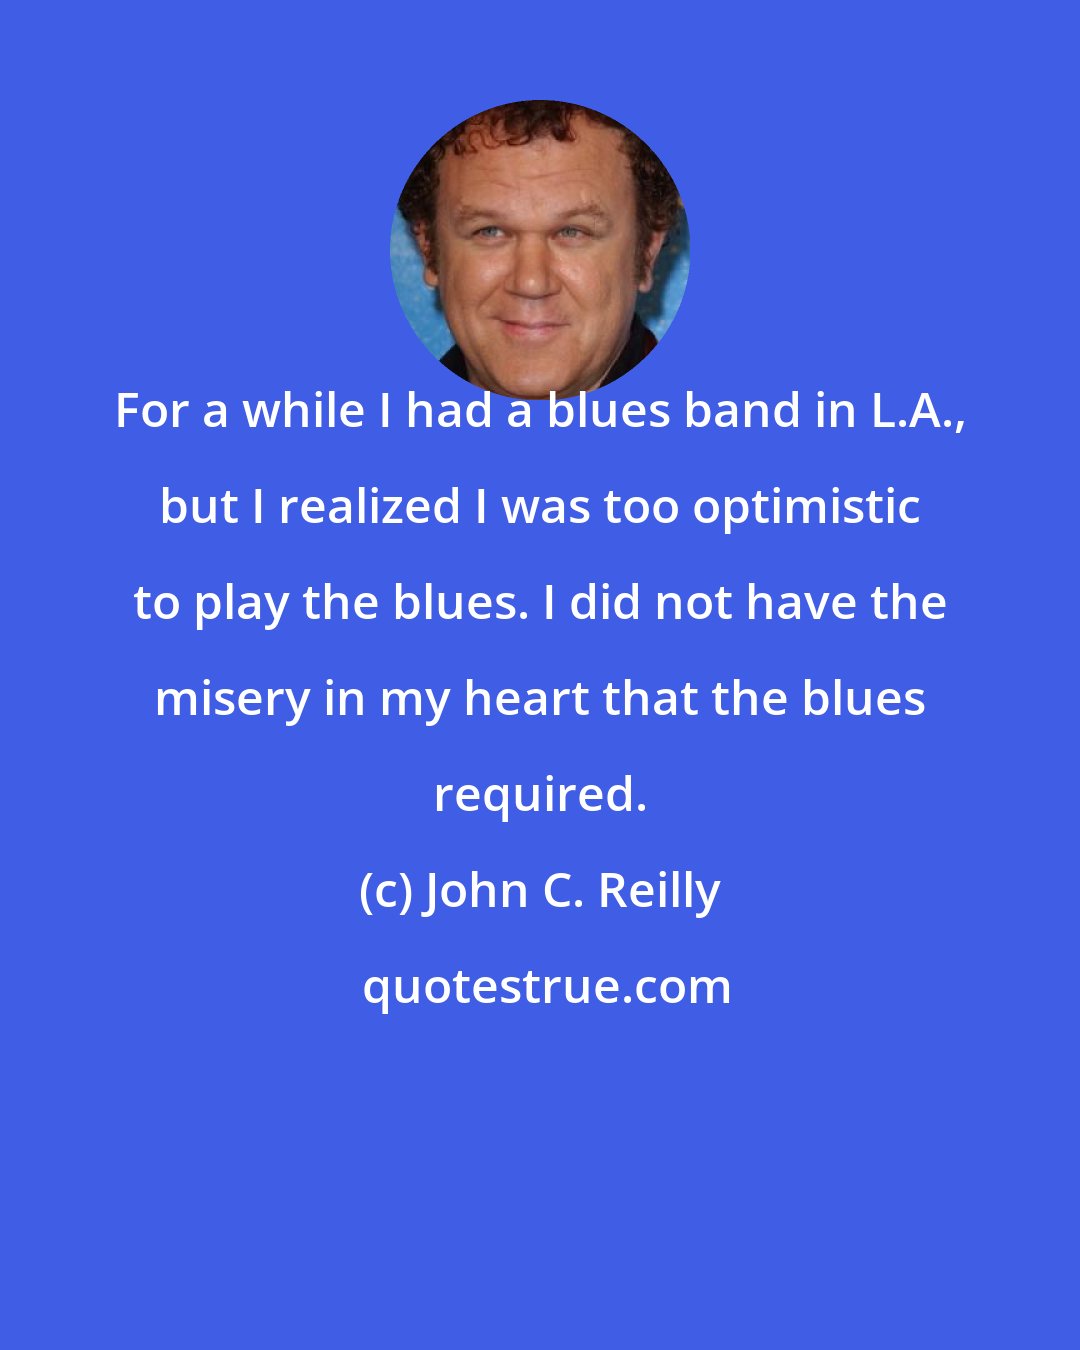 John C. Reilly: For a while I had a blues band in L.A., but I realized I was too optimistic to play the blues. I did not have the misery in my heart that the blues required.